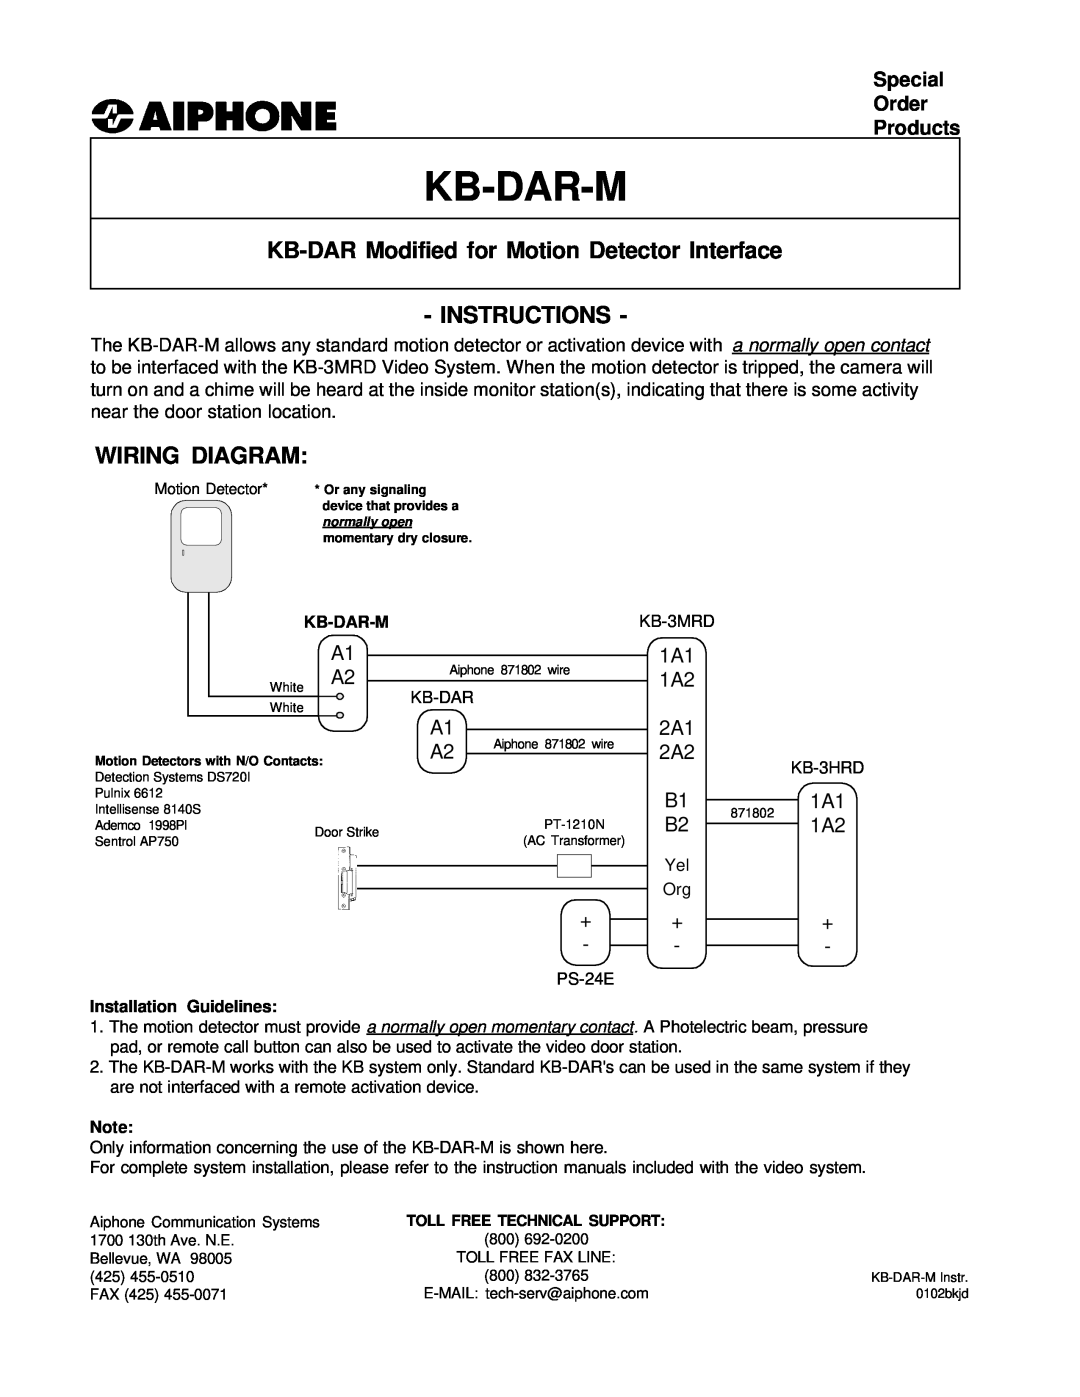 Aiphone 0102bkjd instruction manual Kb-Dar-M, KB-DARModified for Motion Detector Interface, Instructions, Wiring Diagram 